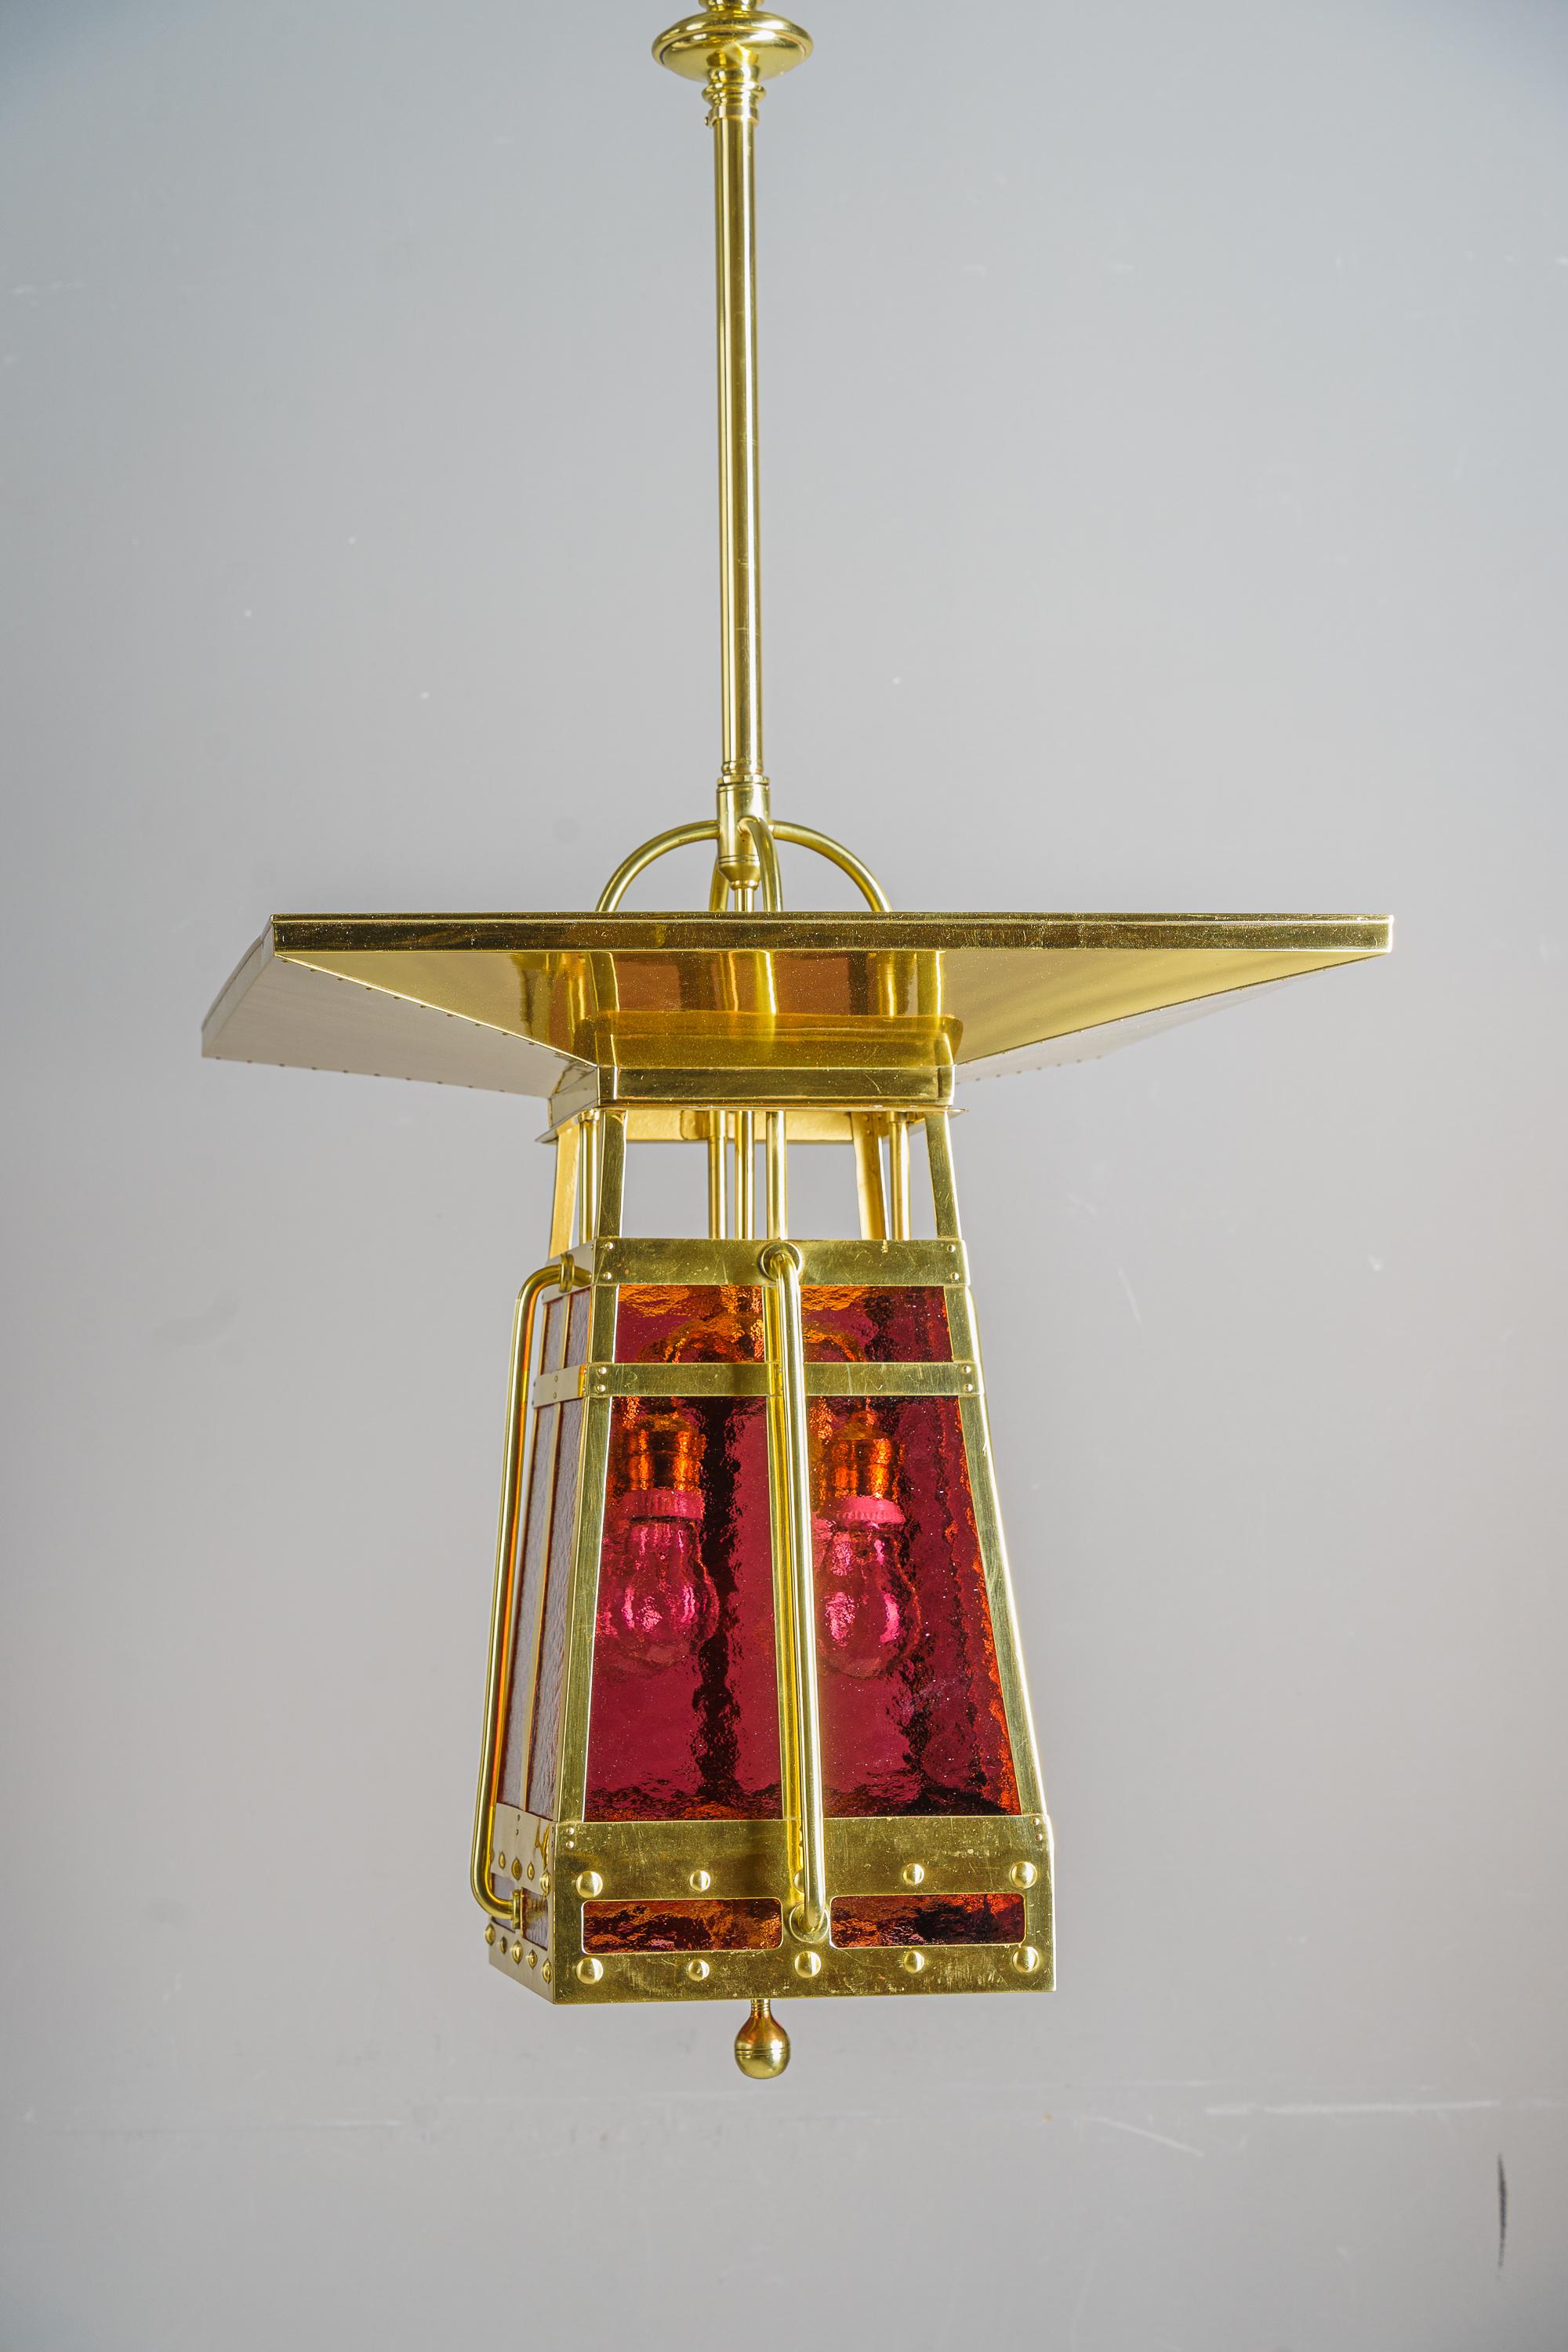 Art Deco pendant vienna around 1920s
Brass polished and stove enameled
Original antique glass shades